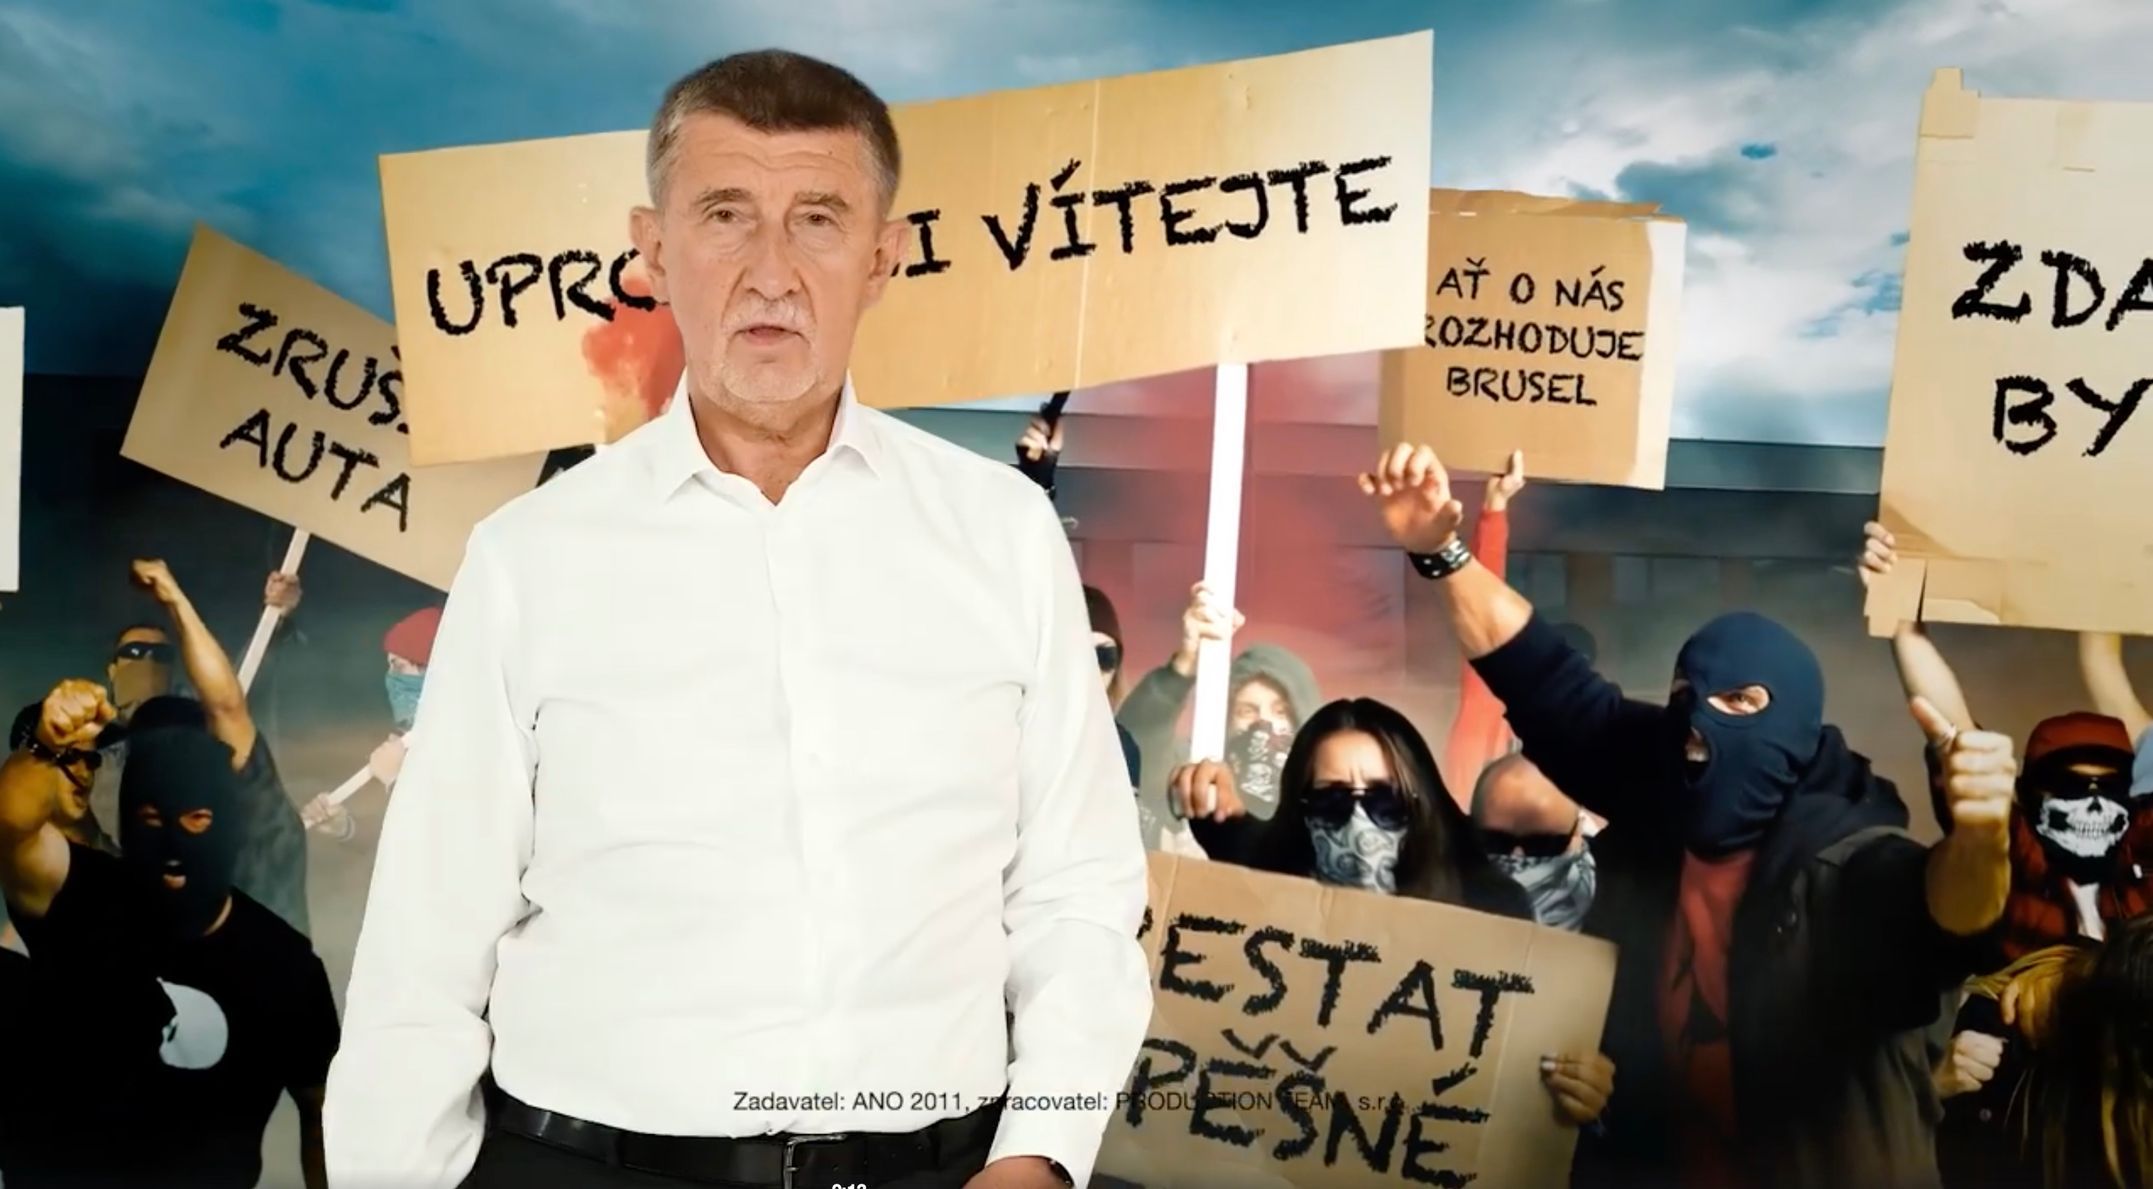 Babiš's spot attacking the Pirates worked, mobilizes voters YES, the research found out thumbnail